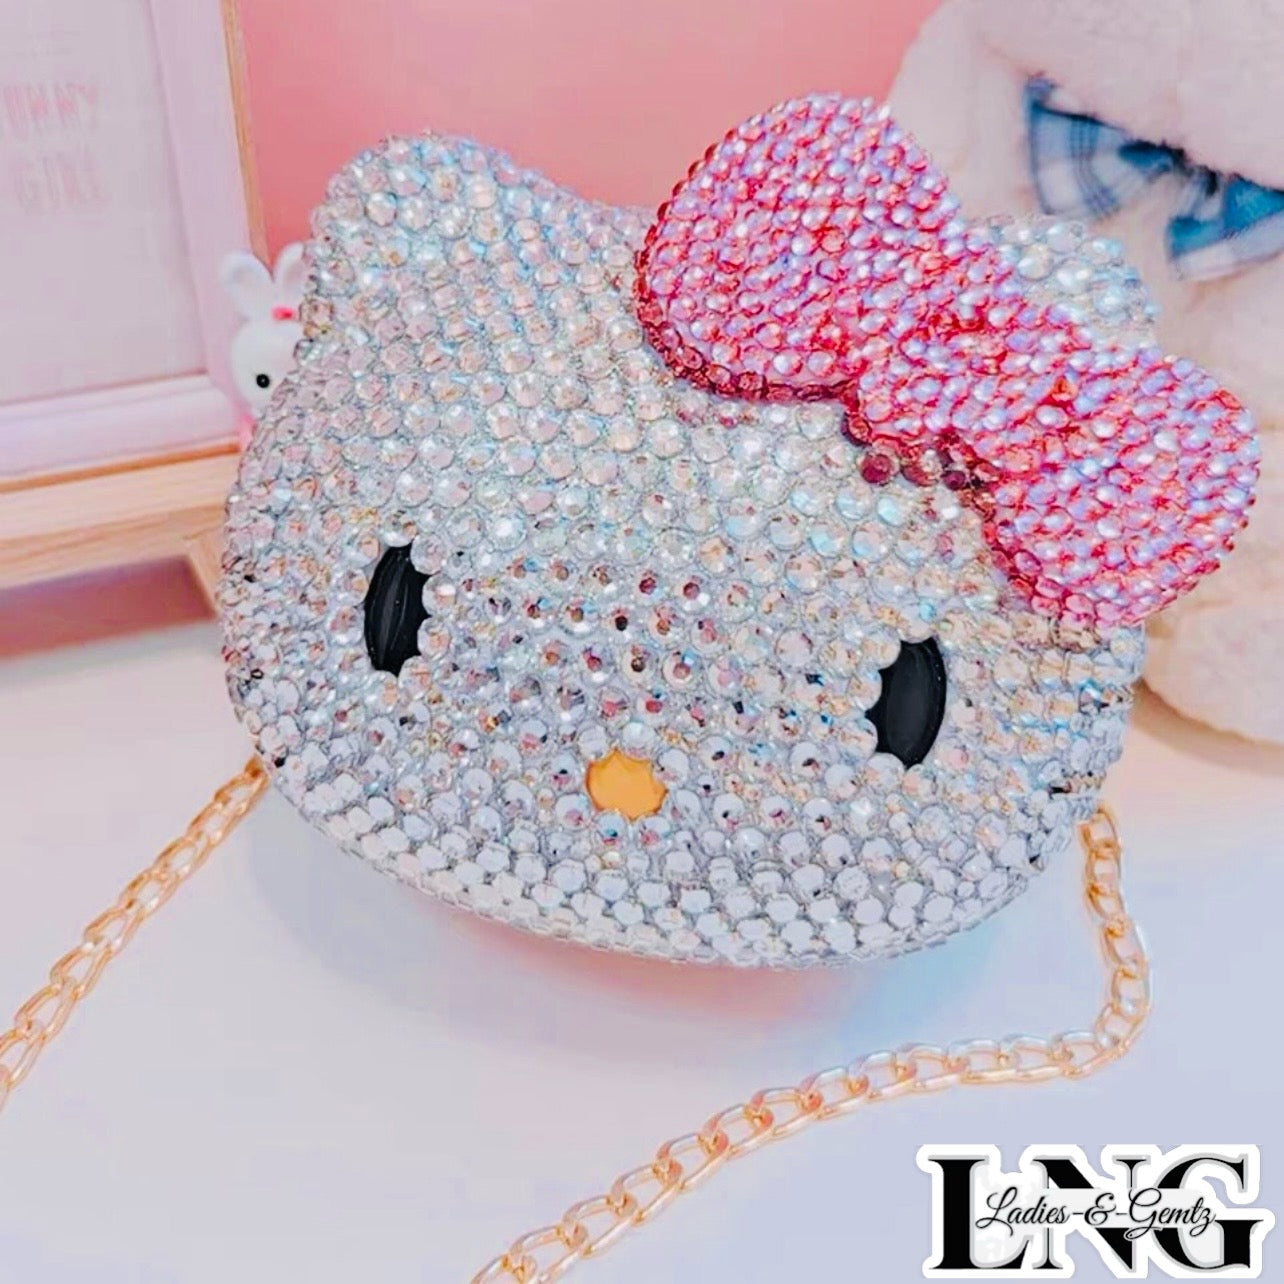 Hello Kitty X Anteprima Pink Silver Wire Shoulder Bag For Sale at 1stDibs |  anteprima hello kitty bag, hello kitty purse, anteprima hello kitty bag  price